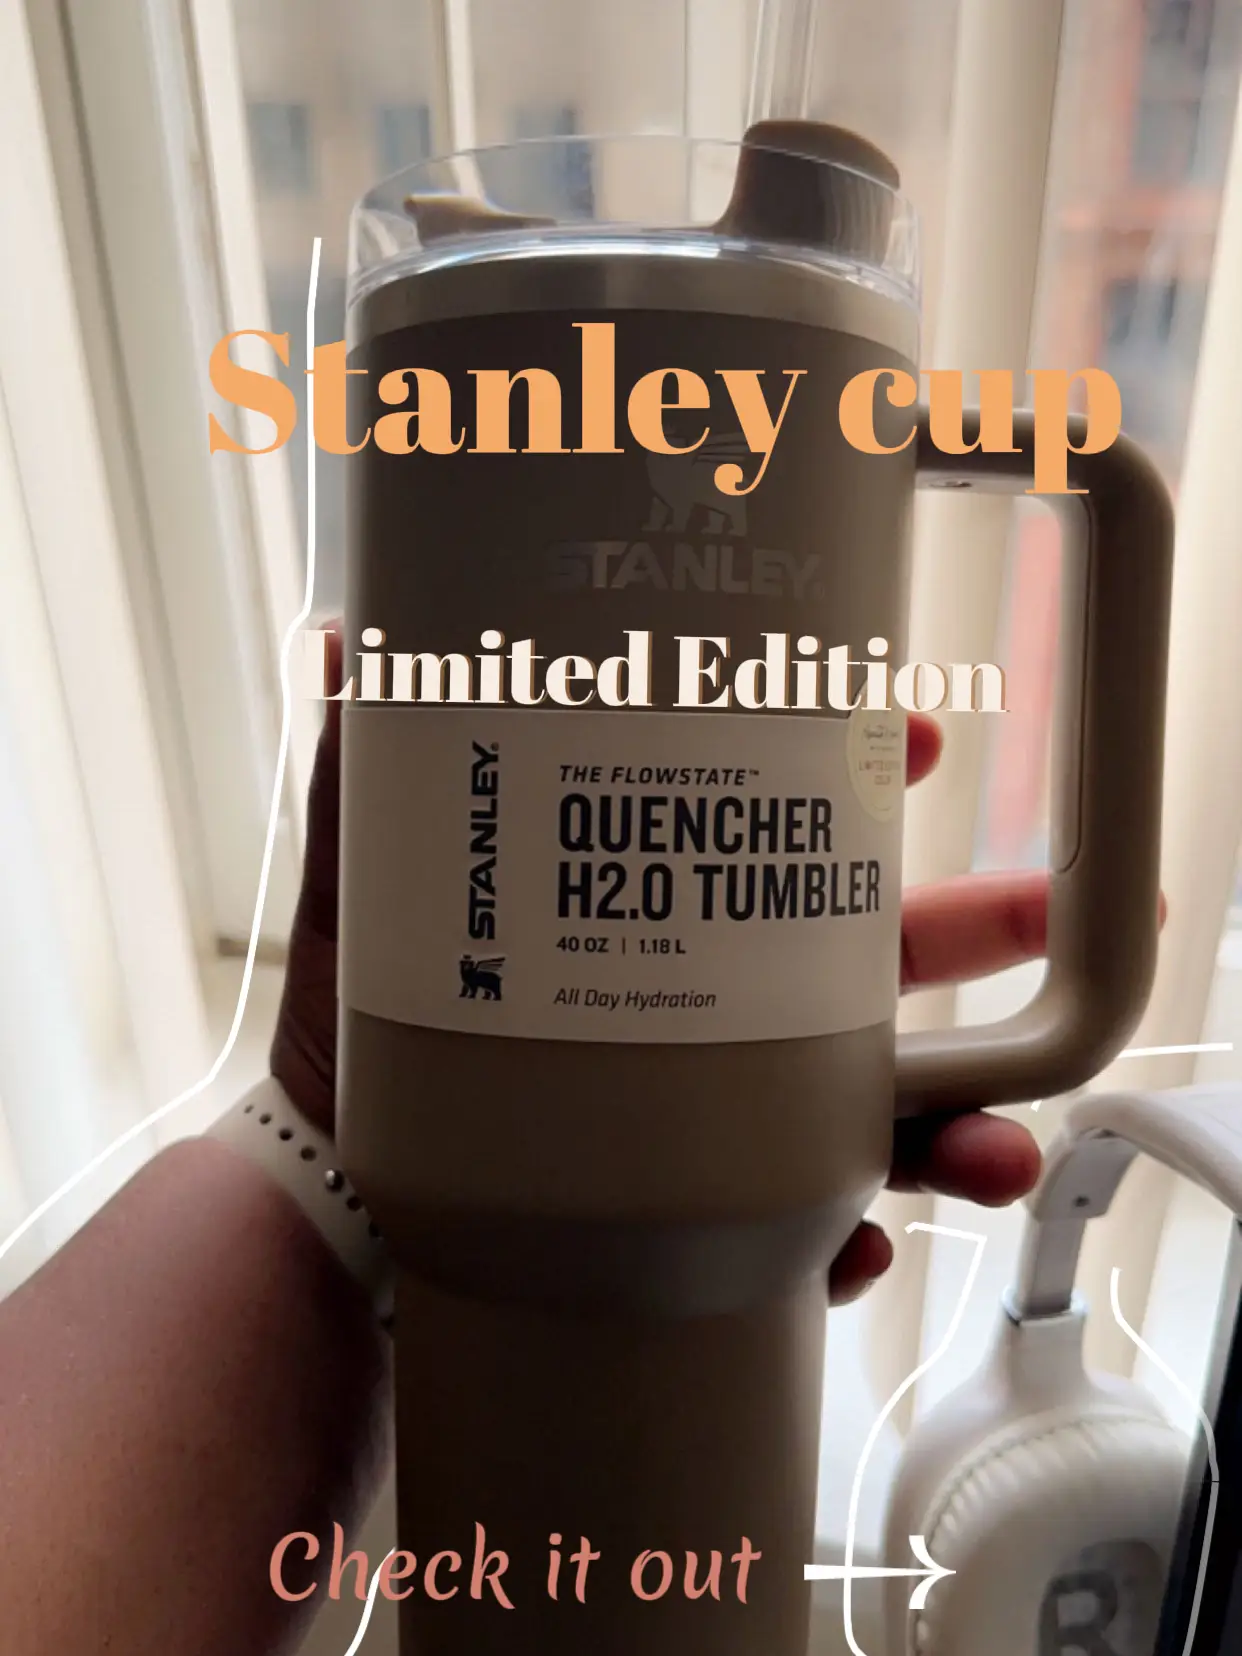 The new Stanley 64oz tumbler is so awesome 👏🏻 #stanleycup #stanleytumbler  